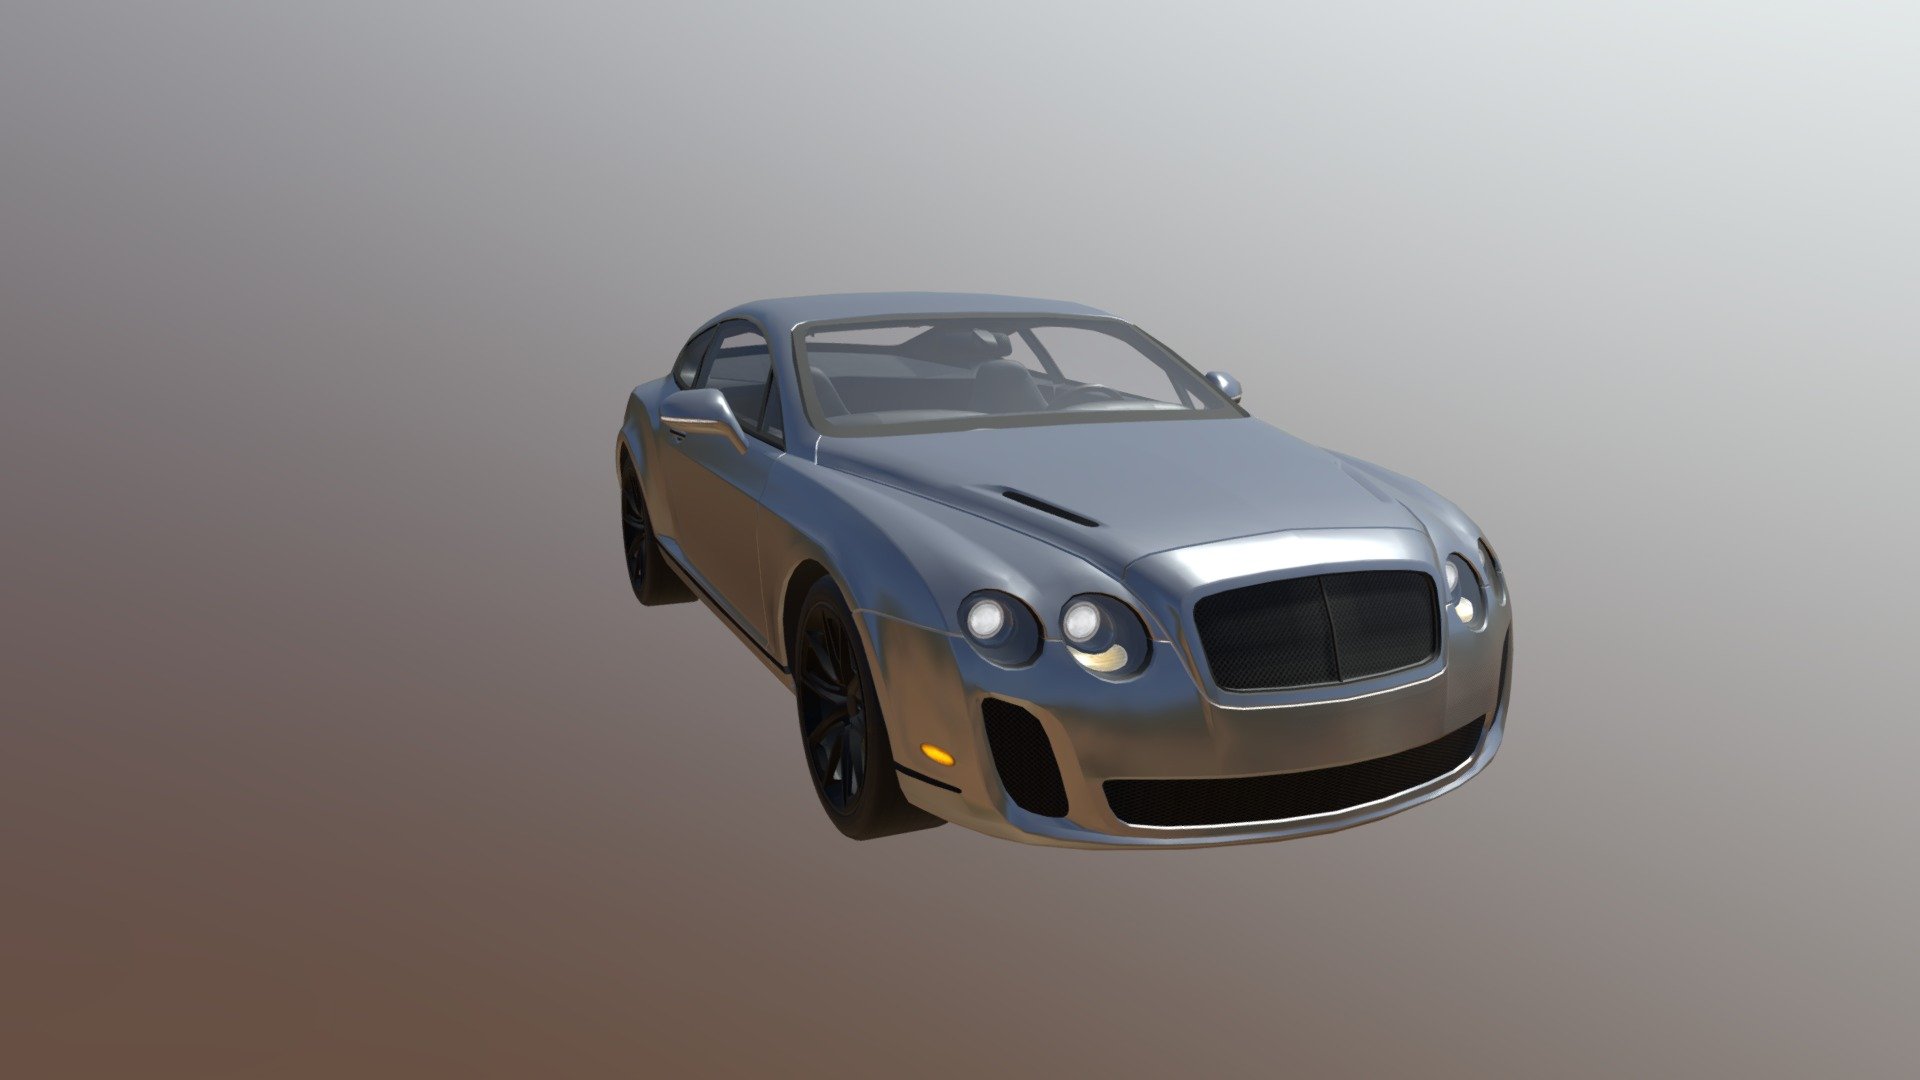 Package Contains a Beautiful Car with fully textured Good Quality Interior and open-able doors, Bonnet, Boot etc. Ready to use in Your game. This model has 4 LODs and using Atlas Texture so it can be used for PC and mobile projects. Perfect for any Games like Third-Person Games, First-Person Games, Car Destruction Games.

Our Real Car 5 and Real Car 5 separated parts are same model.

After Purchase you will find unitypackage,obj,fbx,max,mb in Real Car 6.rar file.

Unity3D Ready. Car only using one single Atlas PBR Texture. Car using Five Materials Paint,Body,Glass,Mirror,Rim. Emissive texture for lights included. Model is properly scaled and aligned along Z-axis. Fully textured Good Quality Interior and Exterior. Separated four wheels, Separated steering wheel and dashboard pointers. Ready to animate. Separated Doors and Mirrors. Ready to animate. Separated Front and Back Bumpers. Separated Bonnet and Boot 3d model